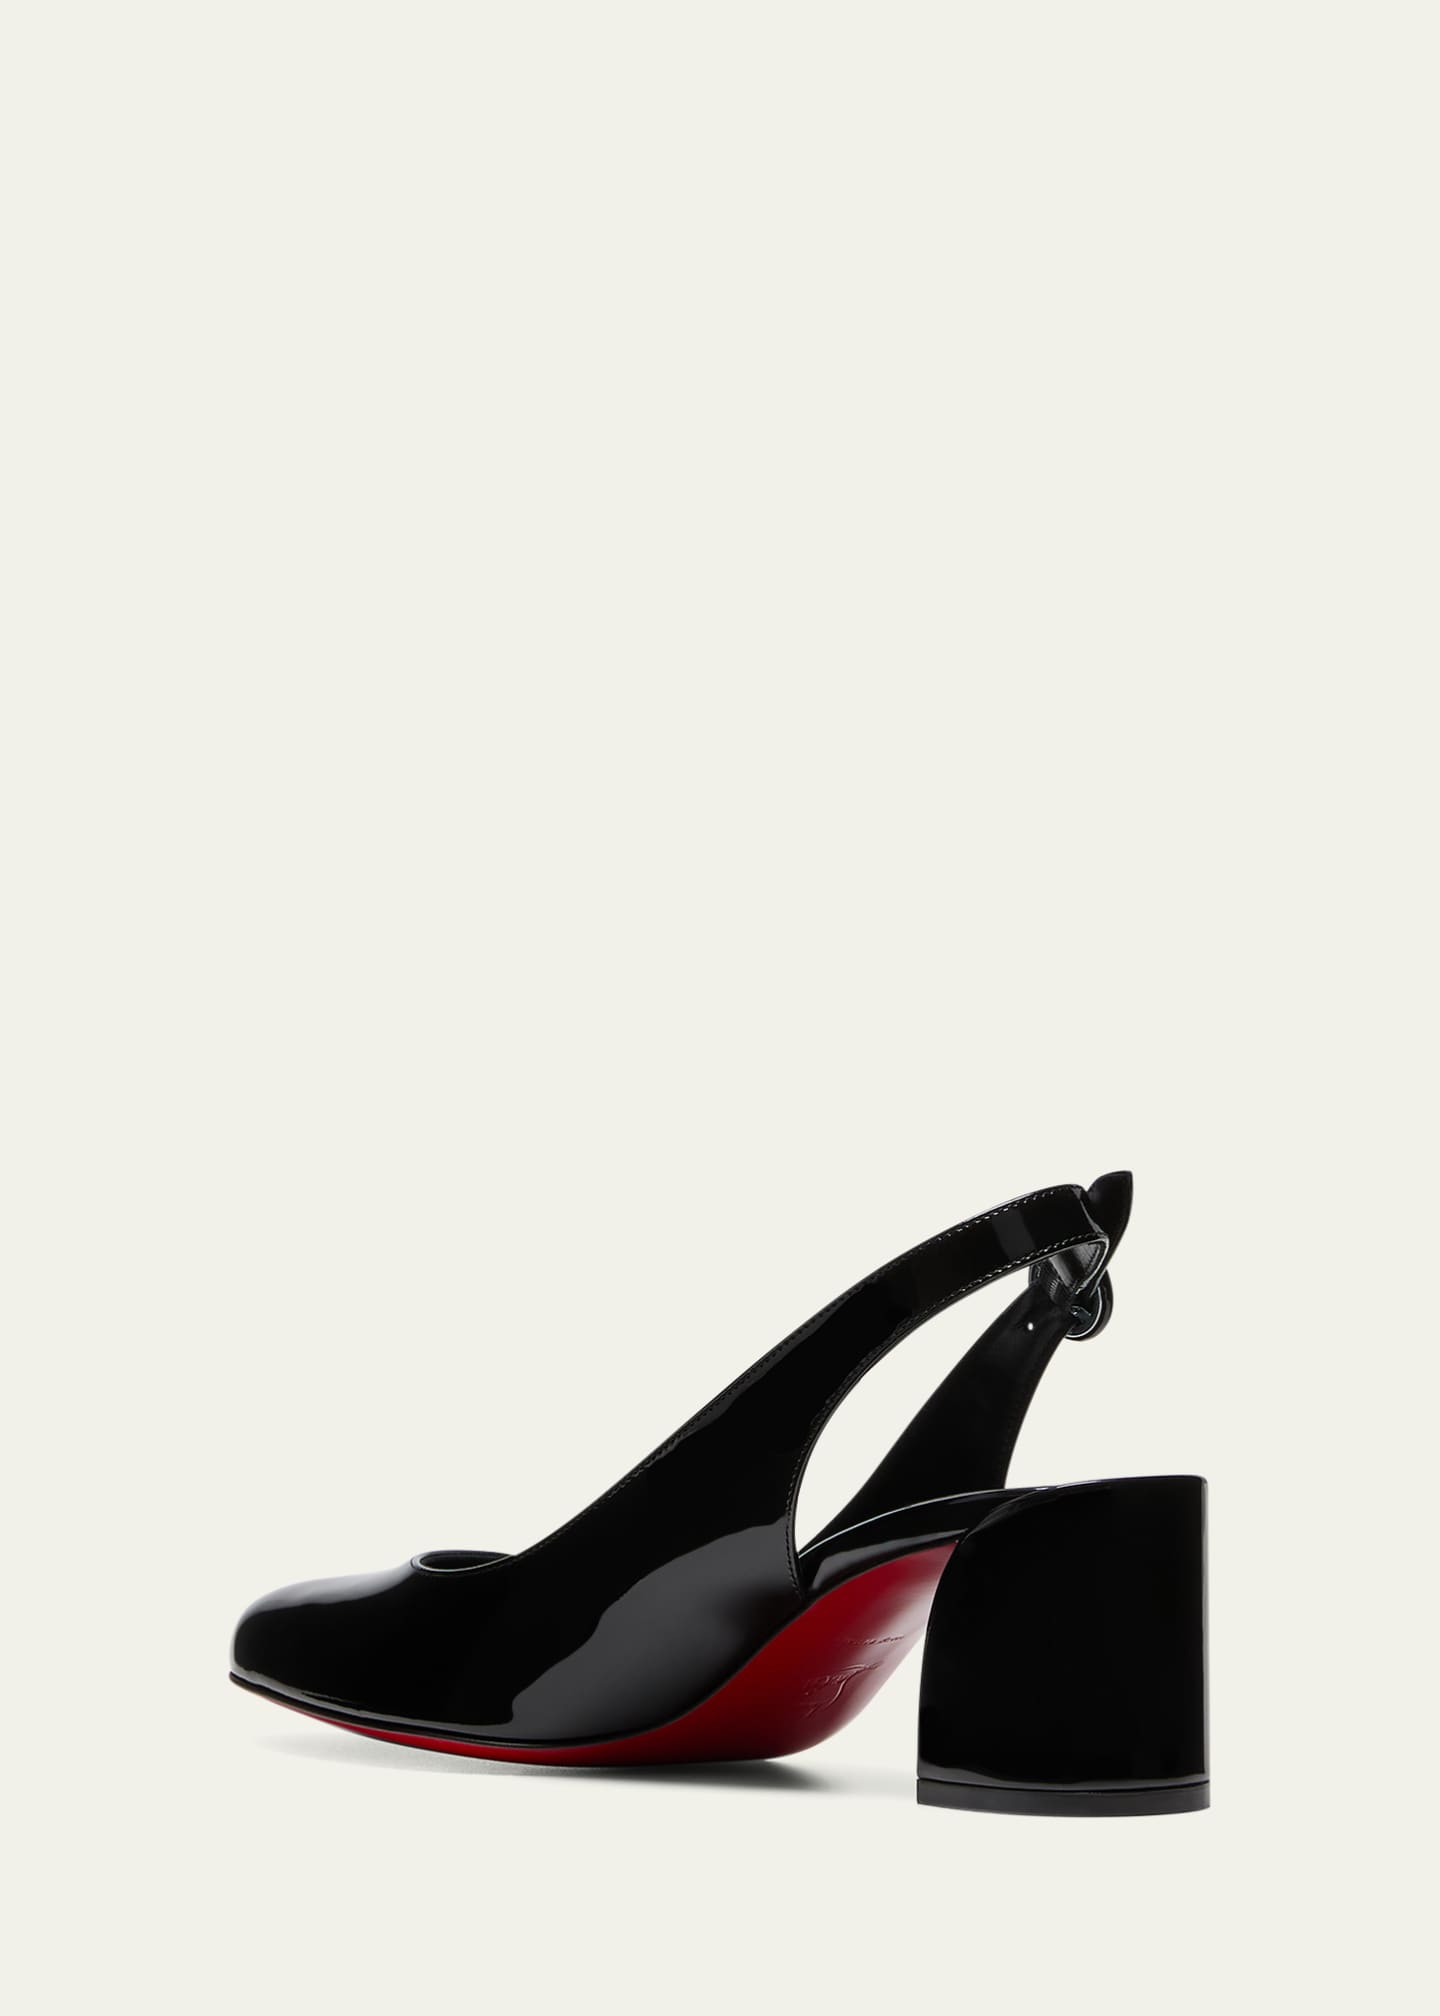 Christian Louboutin So Jane Patent Red Sole Slingback Pumps - Bergdorf ...